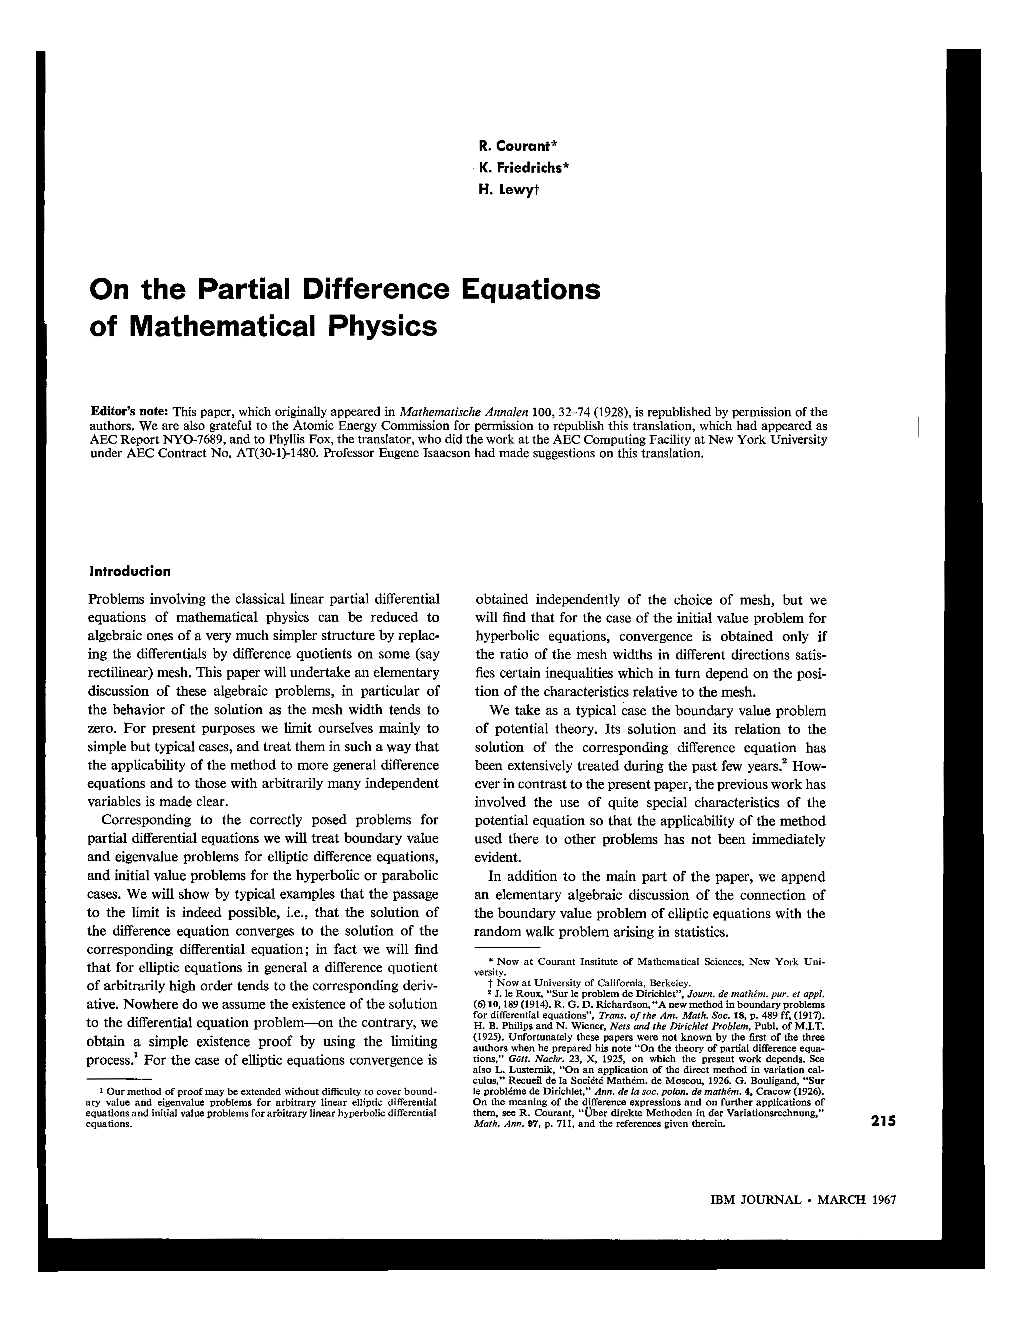 On the Partial Difference Equations of Mathematical Physics